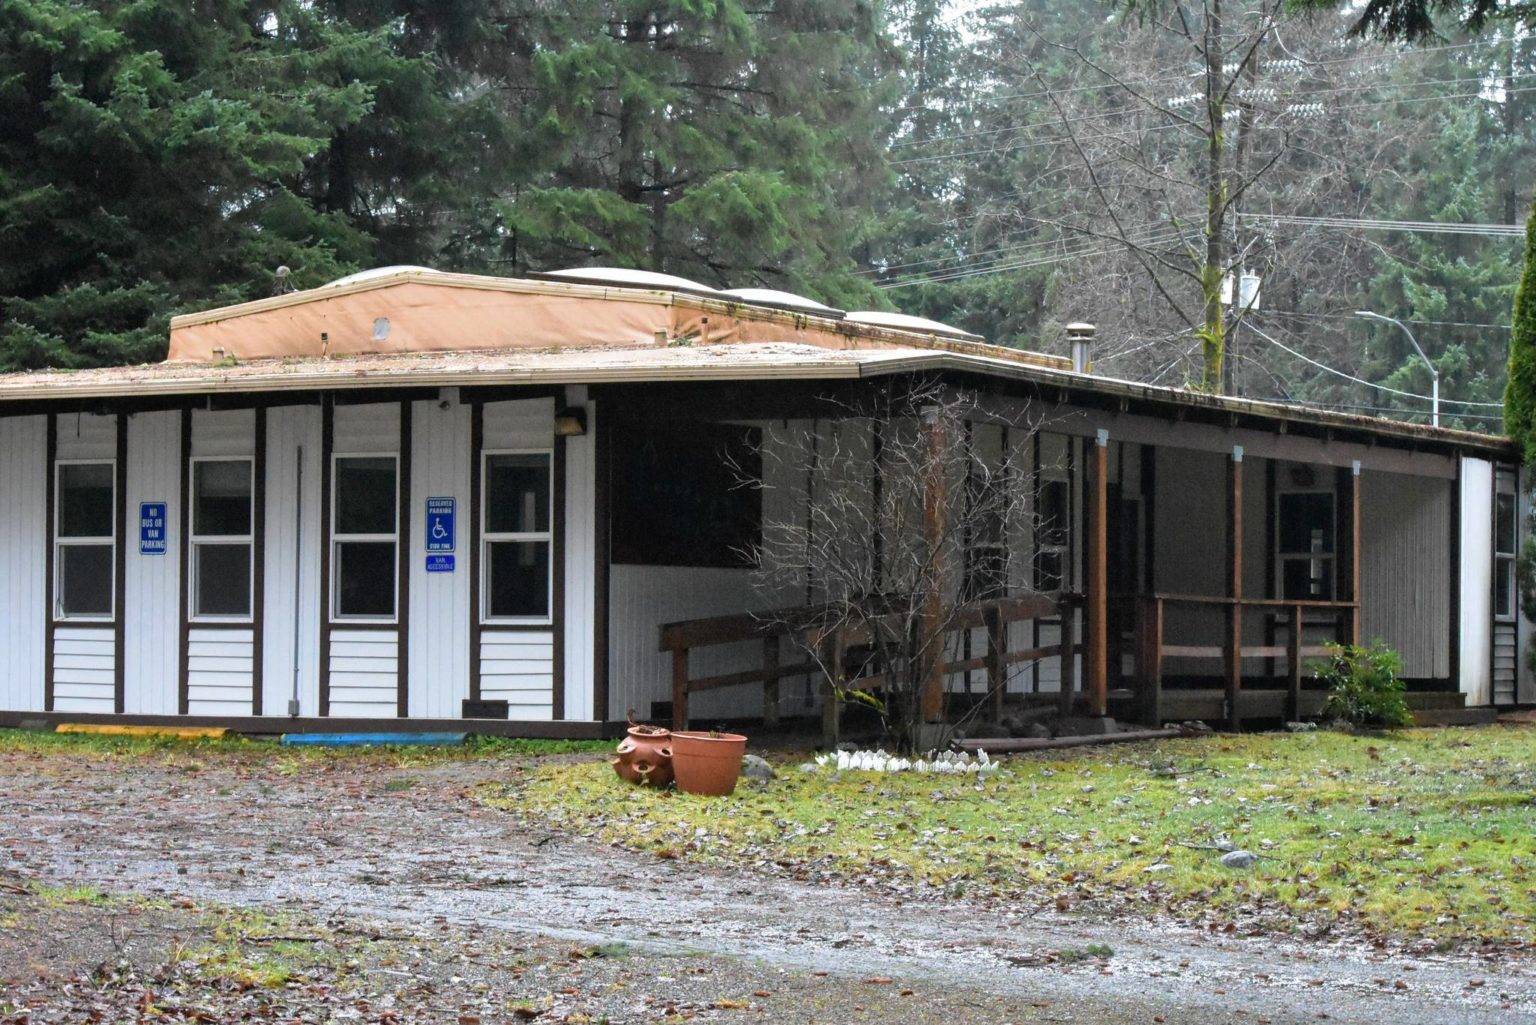 The property at 9290 Hurlock Avenue near the intersection of Egan Drive and Mendenhall Loop Road was vacant Monday, Dec. 7, 2020, but a group of nonprofit organizations are partnering to try and turn the site into a youth homeless center. The City and Borough of Juneau Assembly passed two ordinances Monday which would allow the project to move forward. (Peter Segall / Juneau Empire)